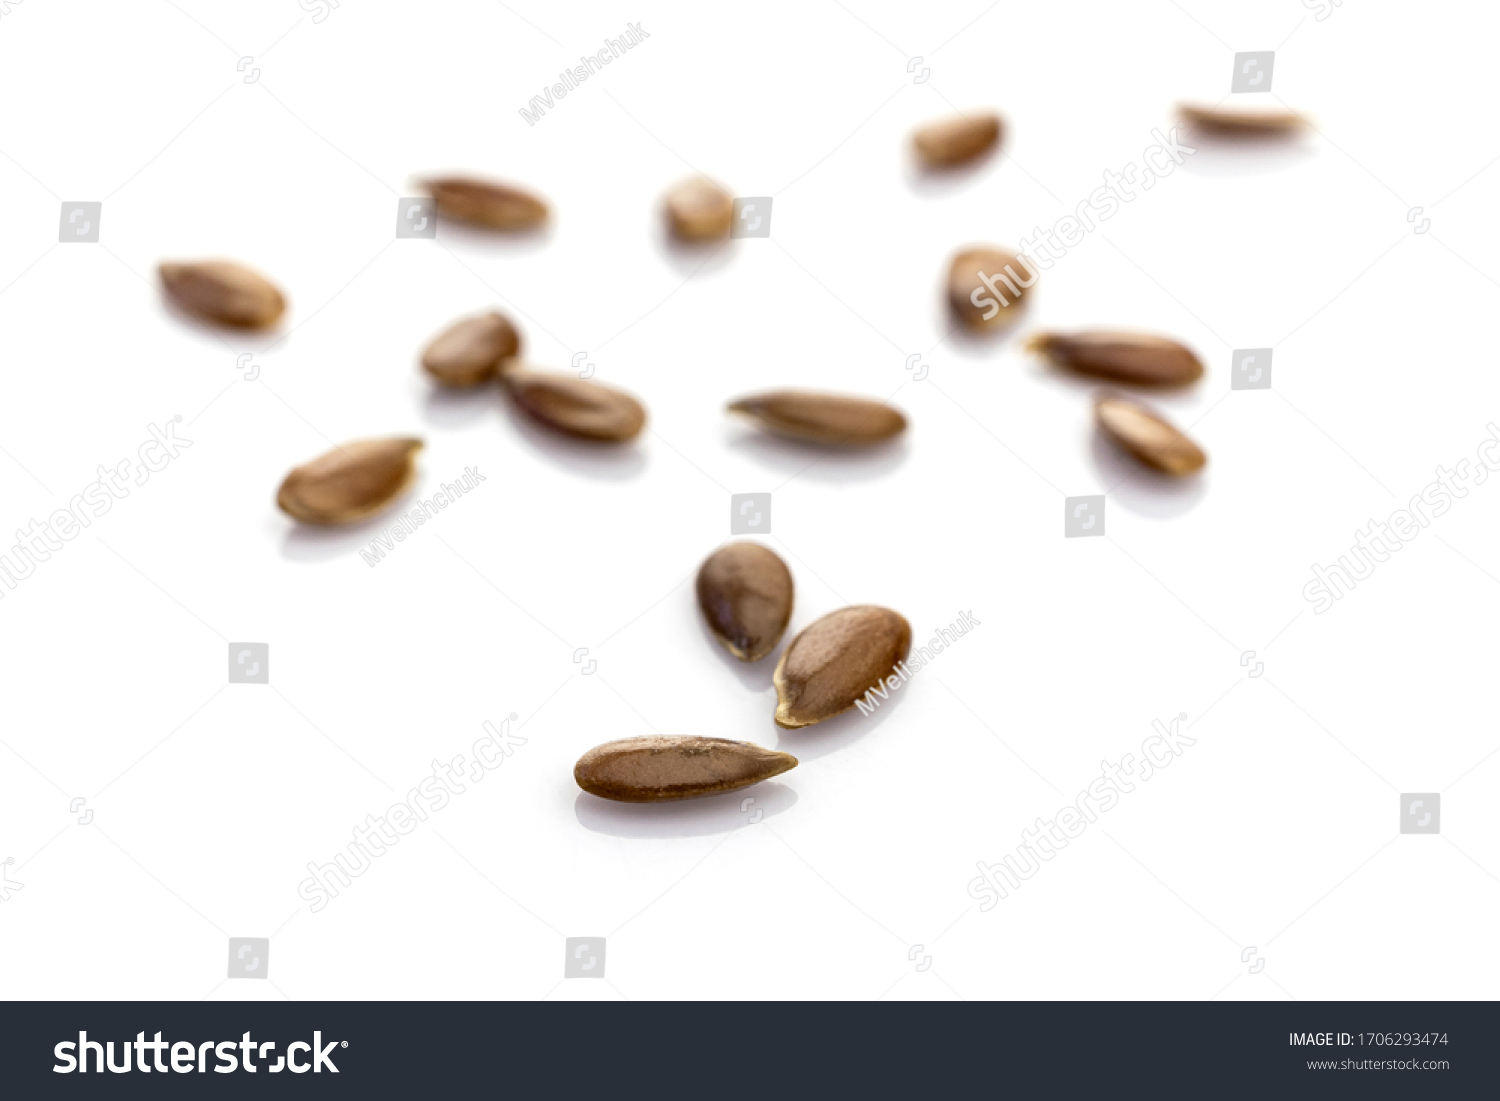 Seeds Linum isolated on white. Pile healthy Linseed food on organic background. Superfood high vitamin e, antioxidant, omega-3, protein and dietary fiber for healthy food. #1706293474